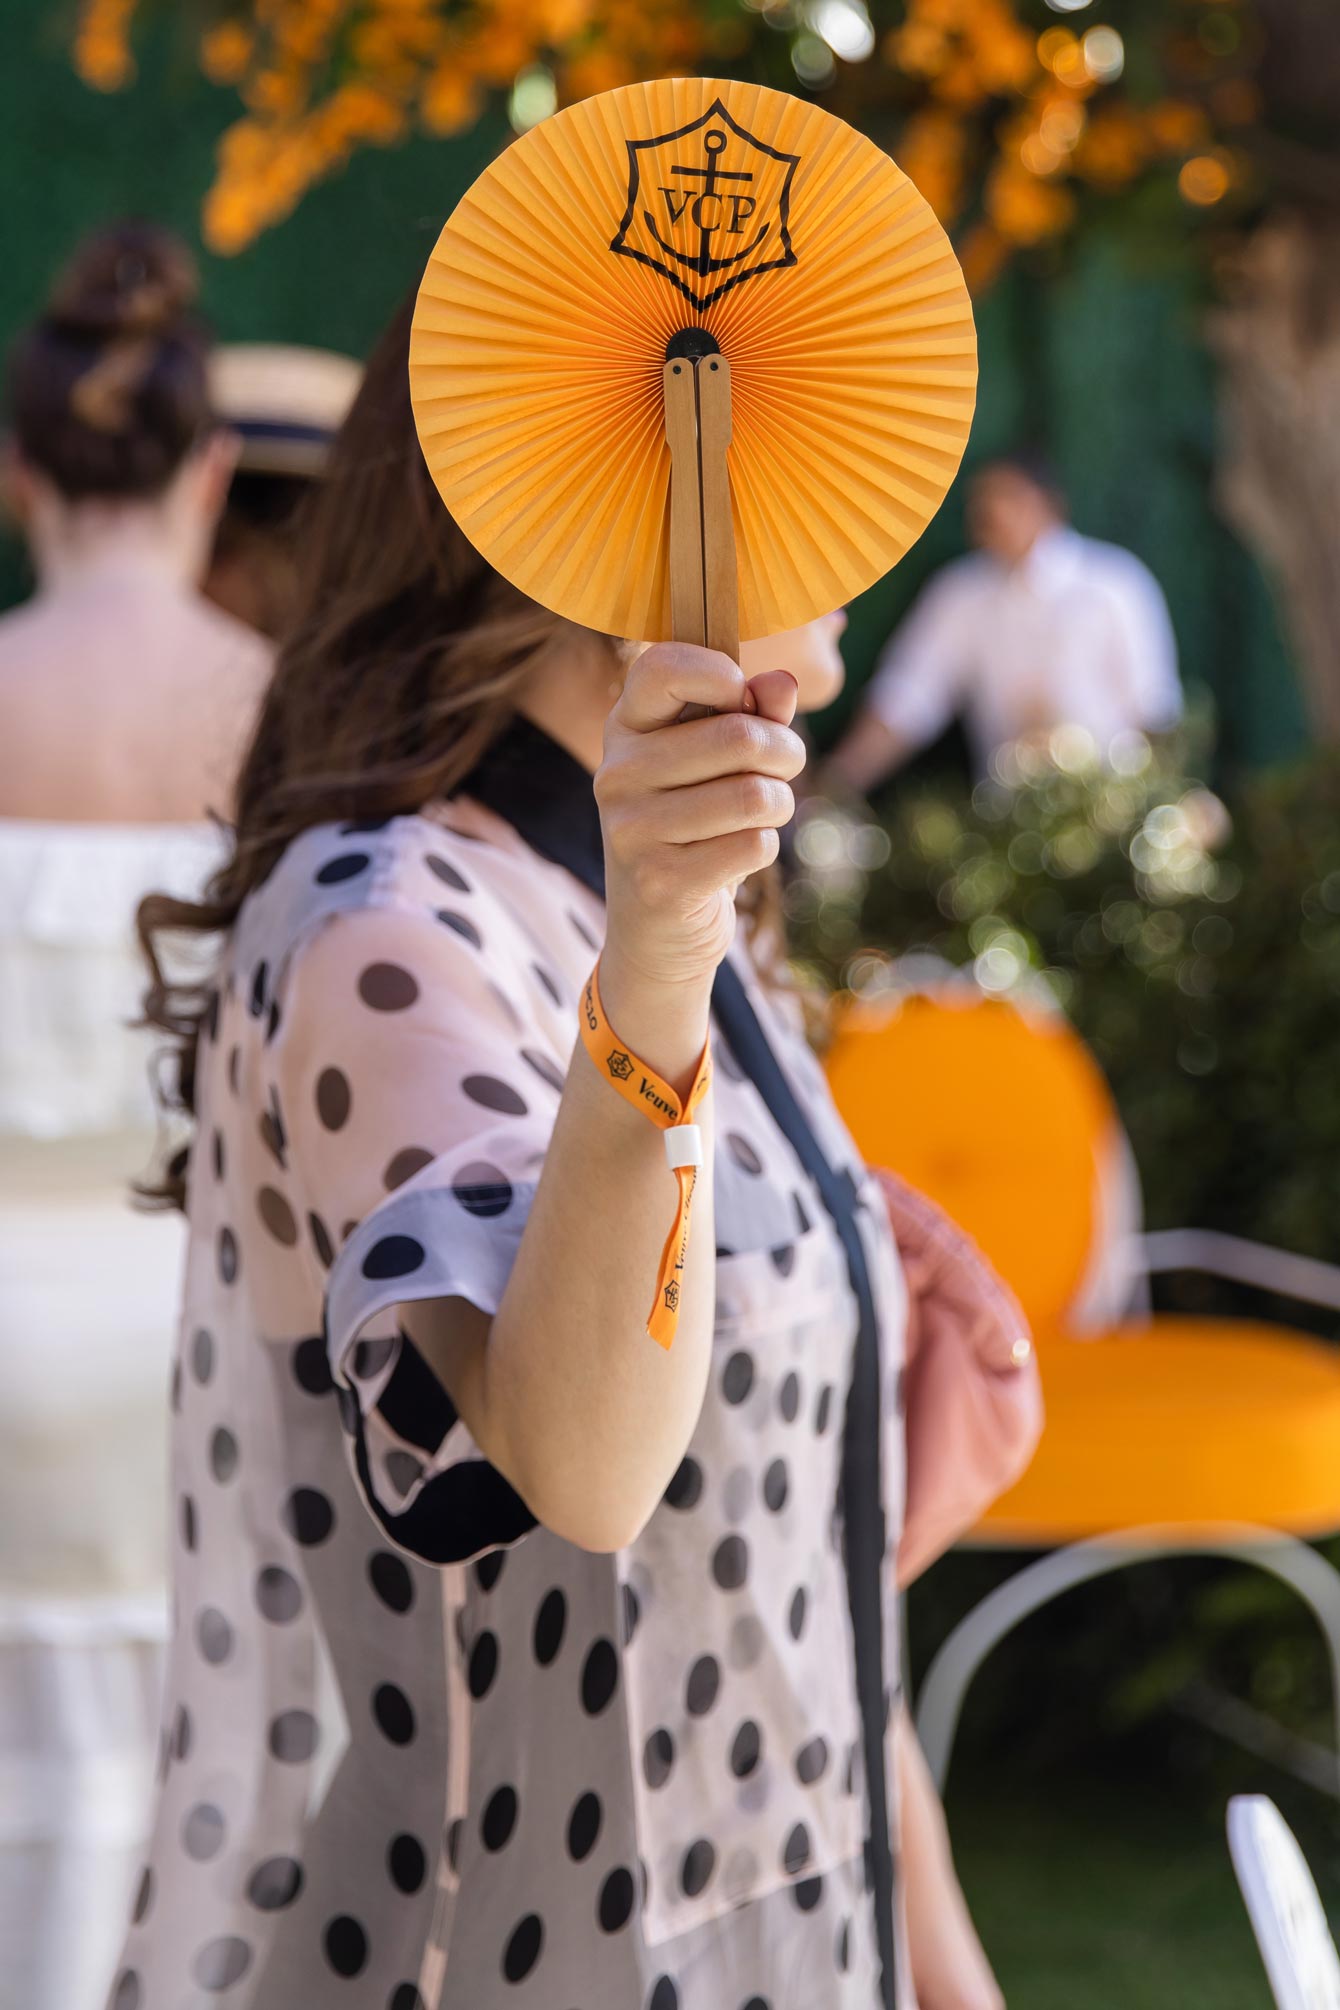 Unleash your inner-artist at a Veuve Clicquot Colourama Series Art and  Champagne class